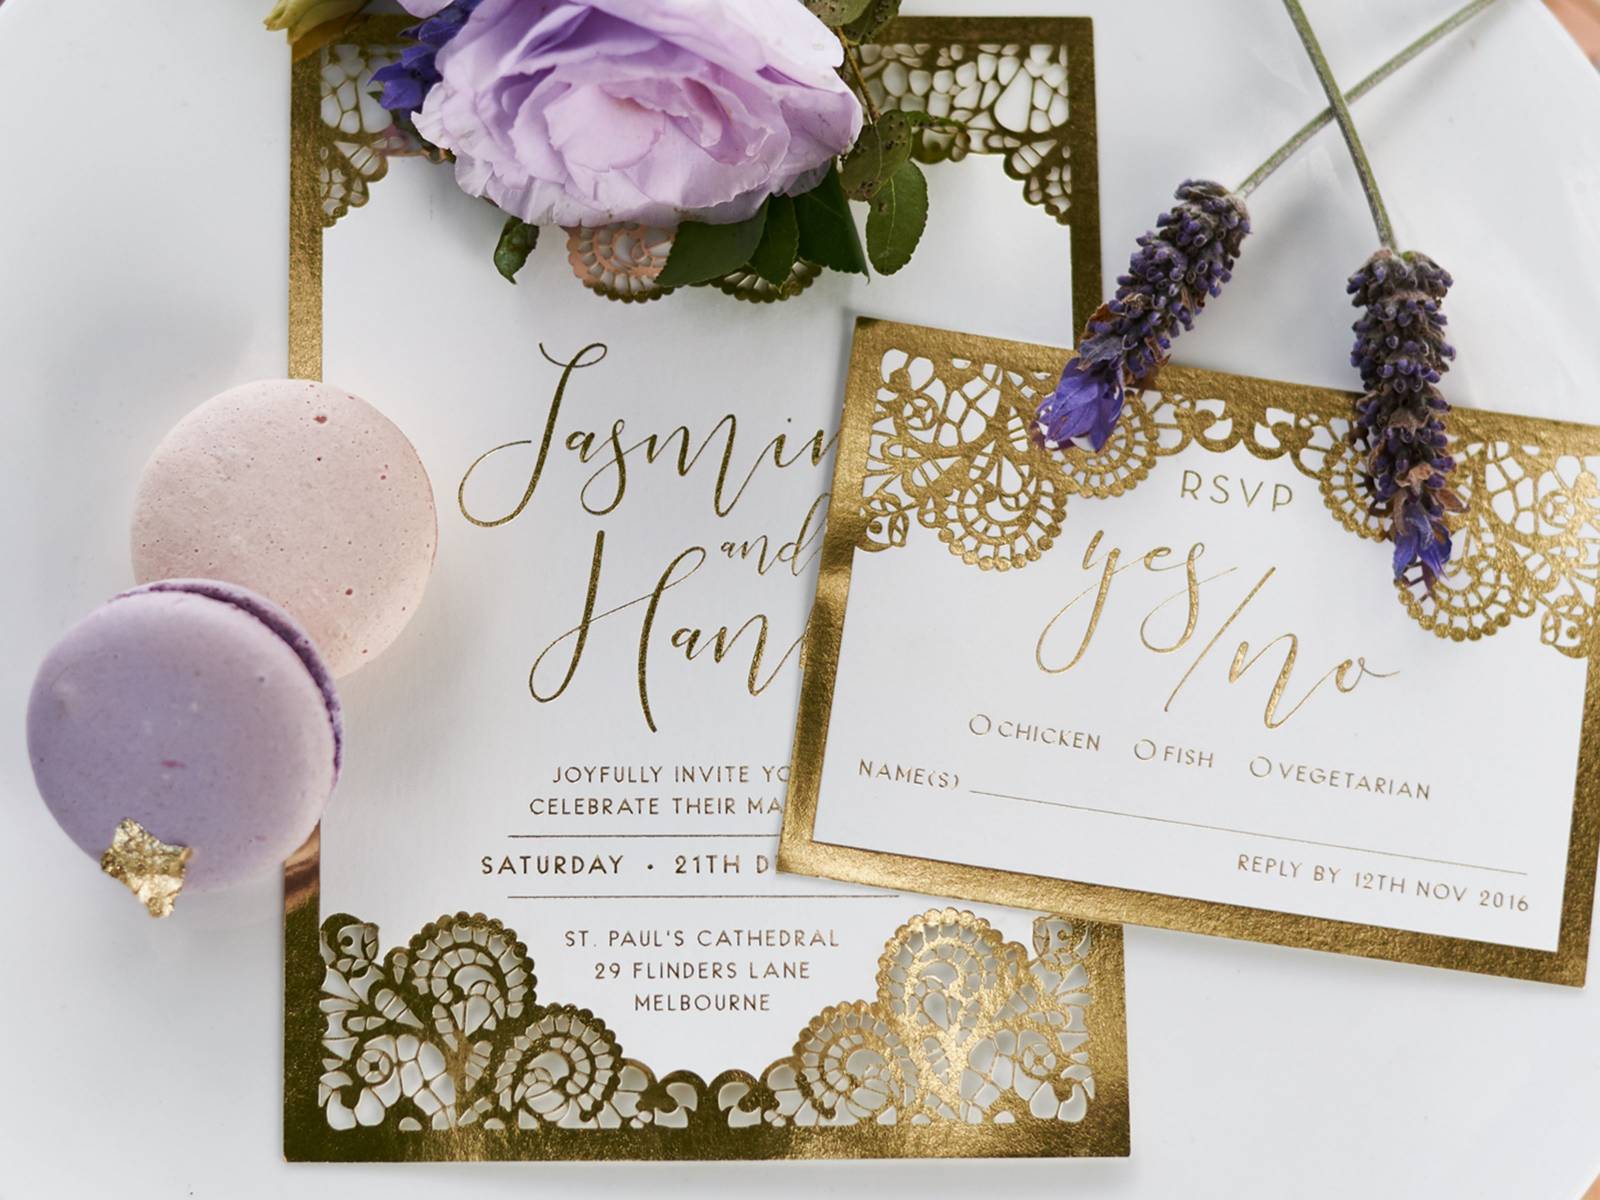 Elegant gold and white wedding invitation and RSVP card, bordered by fresh lavender and macaroons